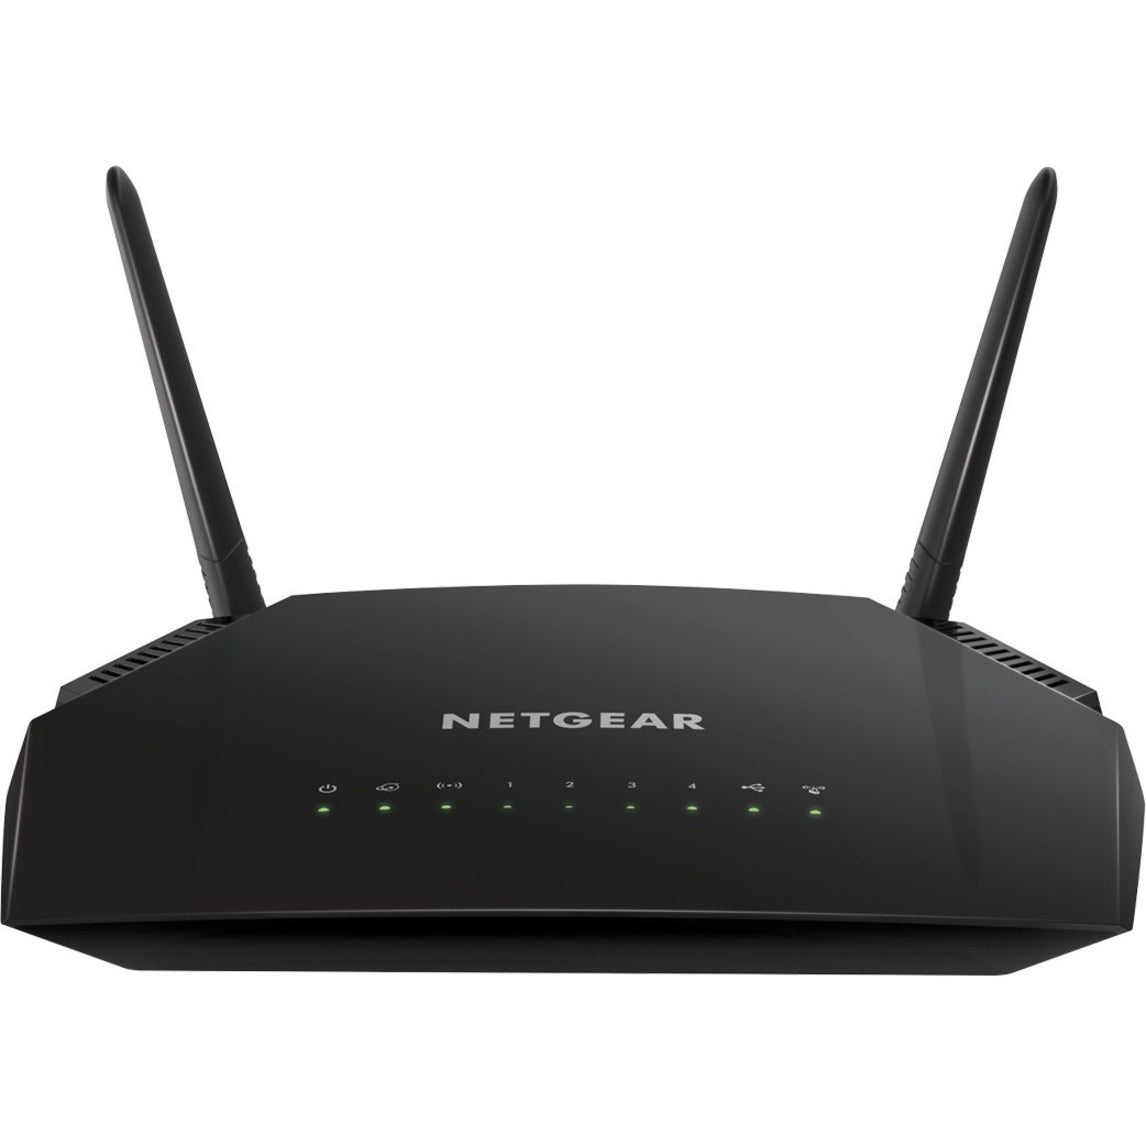 Netgear R6230-100NAS AC1200 Smart WiFi Router, Up to 1200Mbps Speeds for 20 Devices, 1200 sq ft Coverage